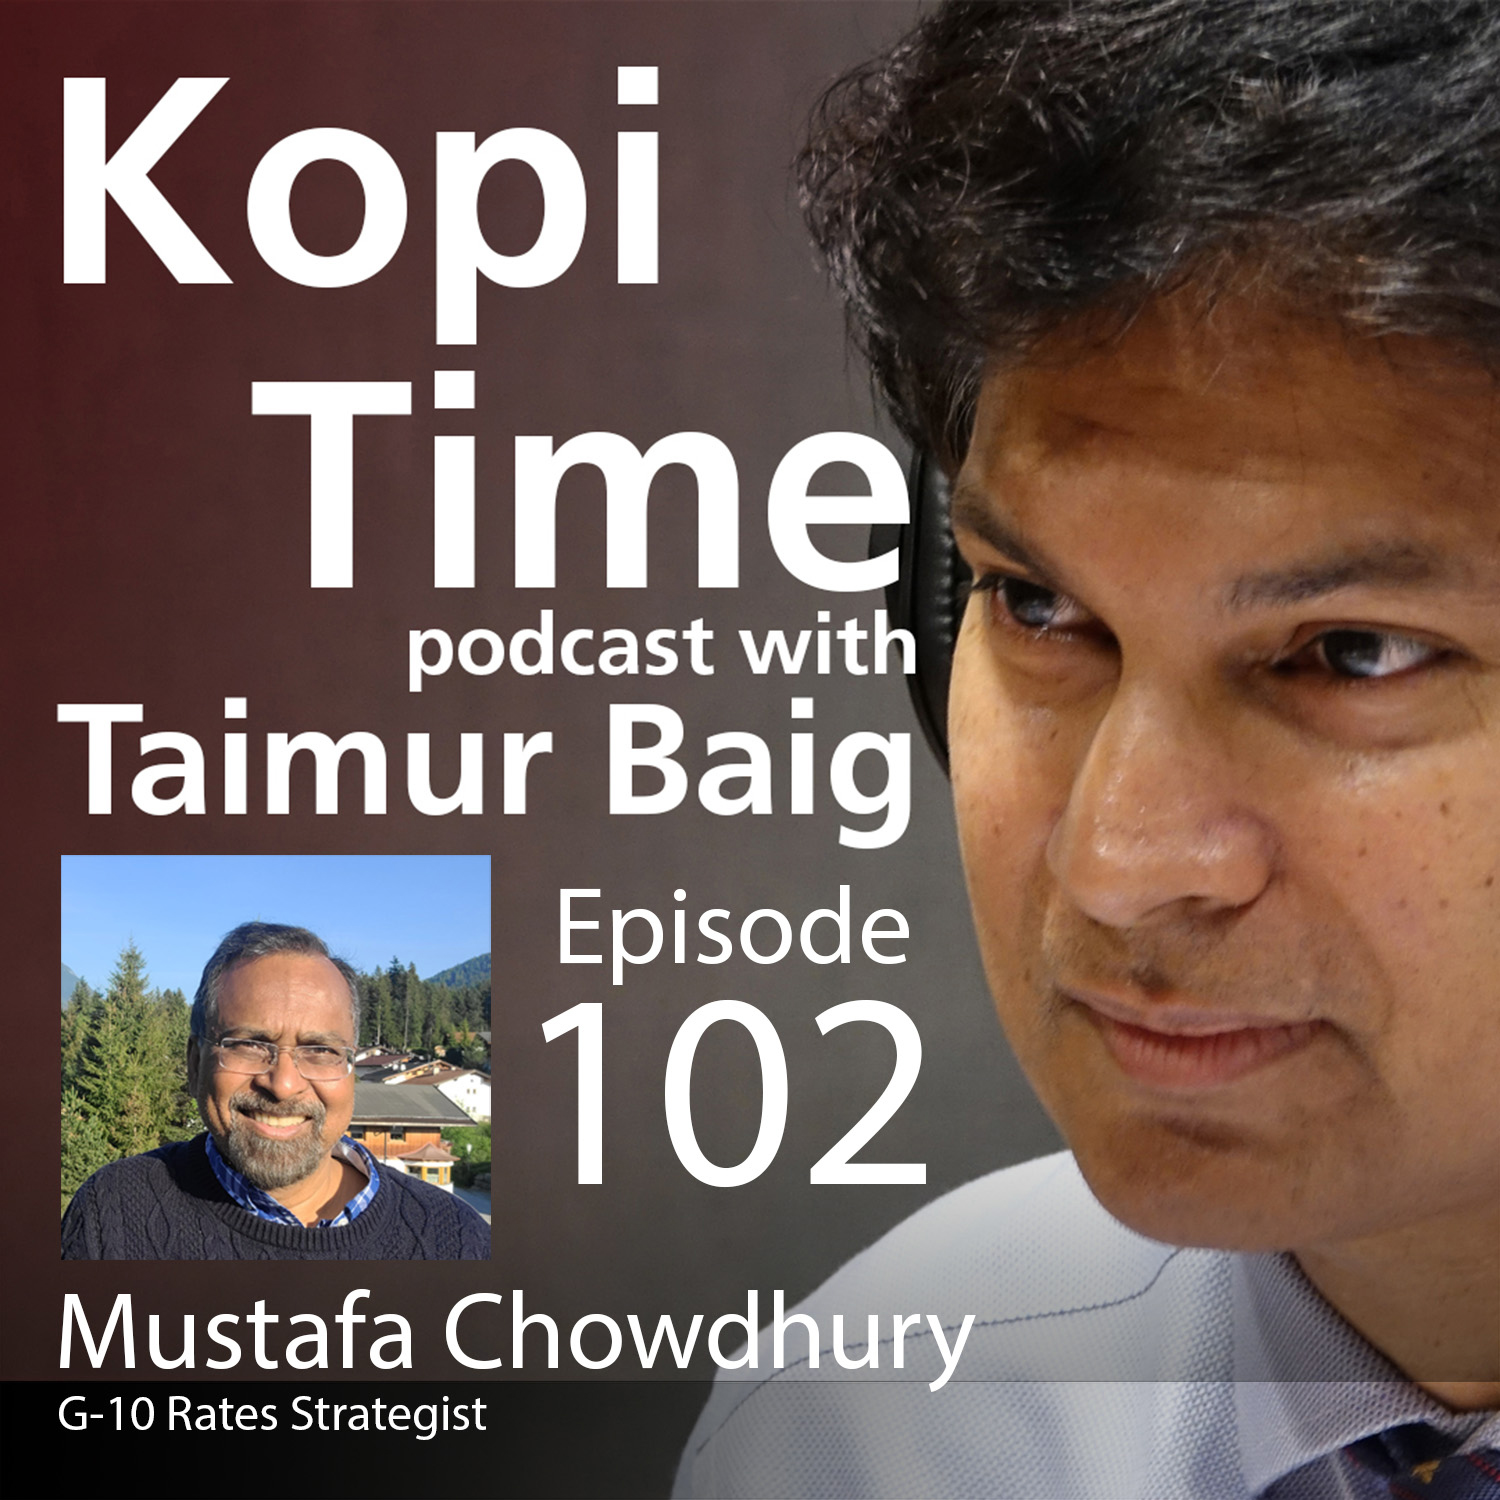 Kopi Time E102 - Mustafa Chowdhury on why rates will remain higher for longer